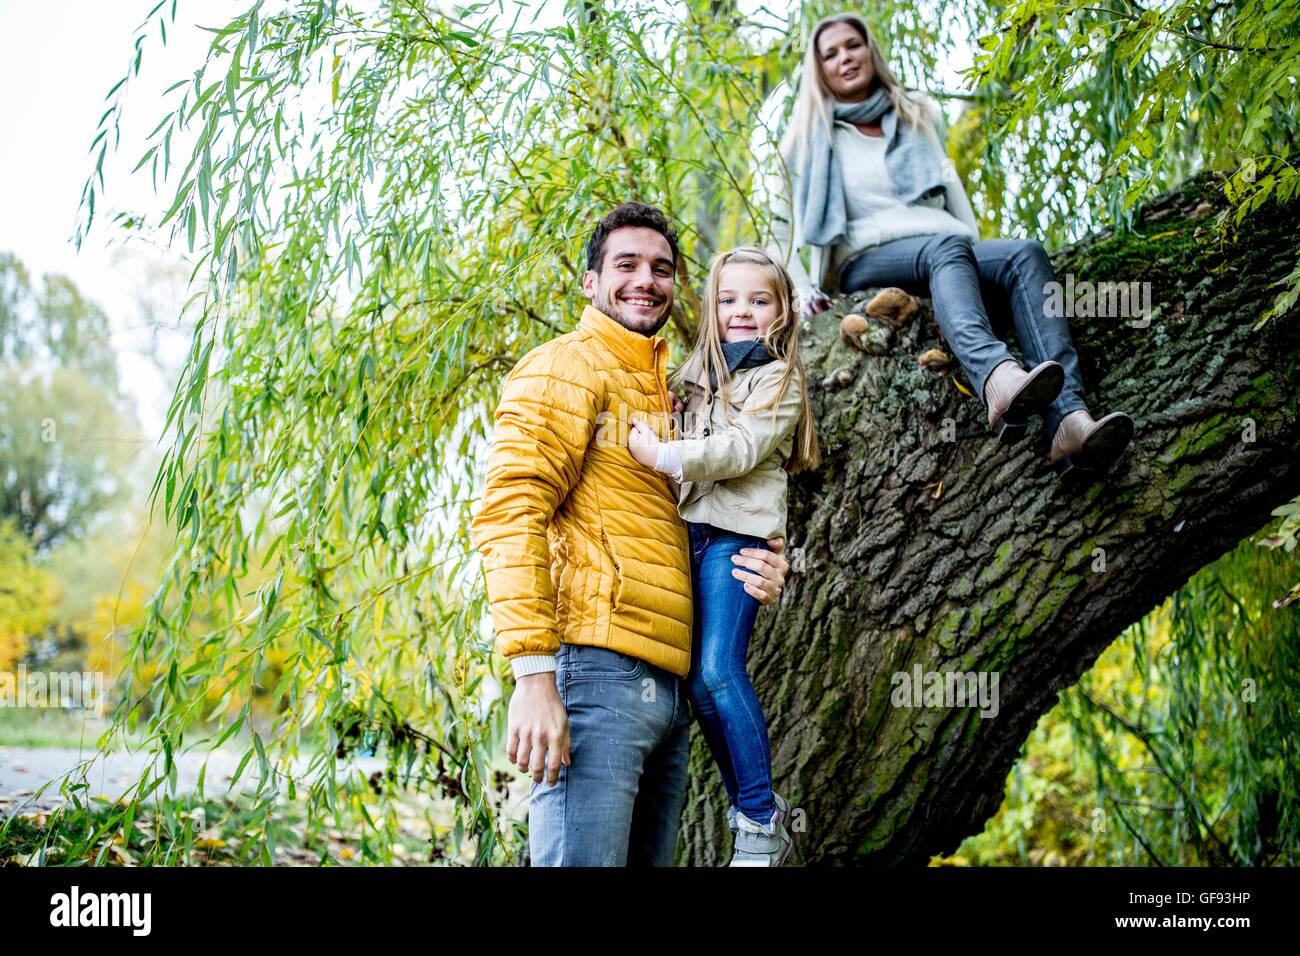 MODEL RELEASED. Father carrying daughter, mother sitting on tree, smiling, portrait. Stock Photo